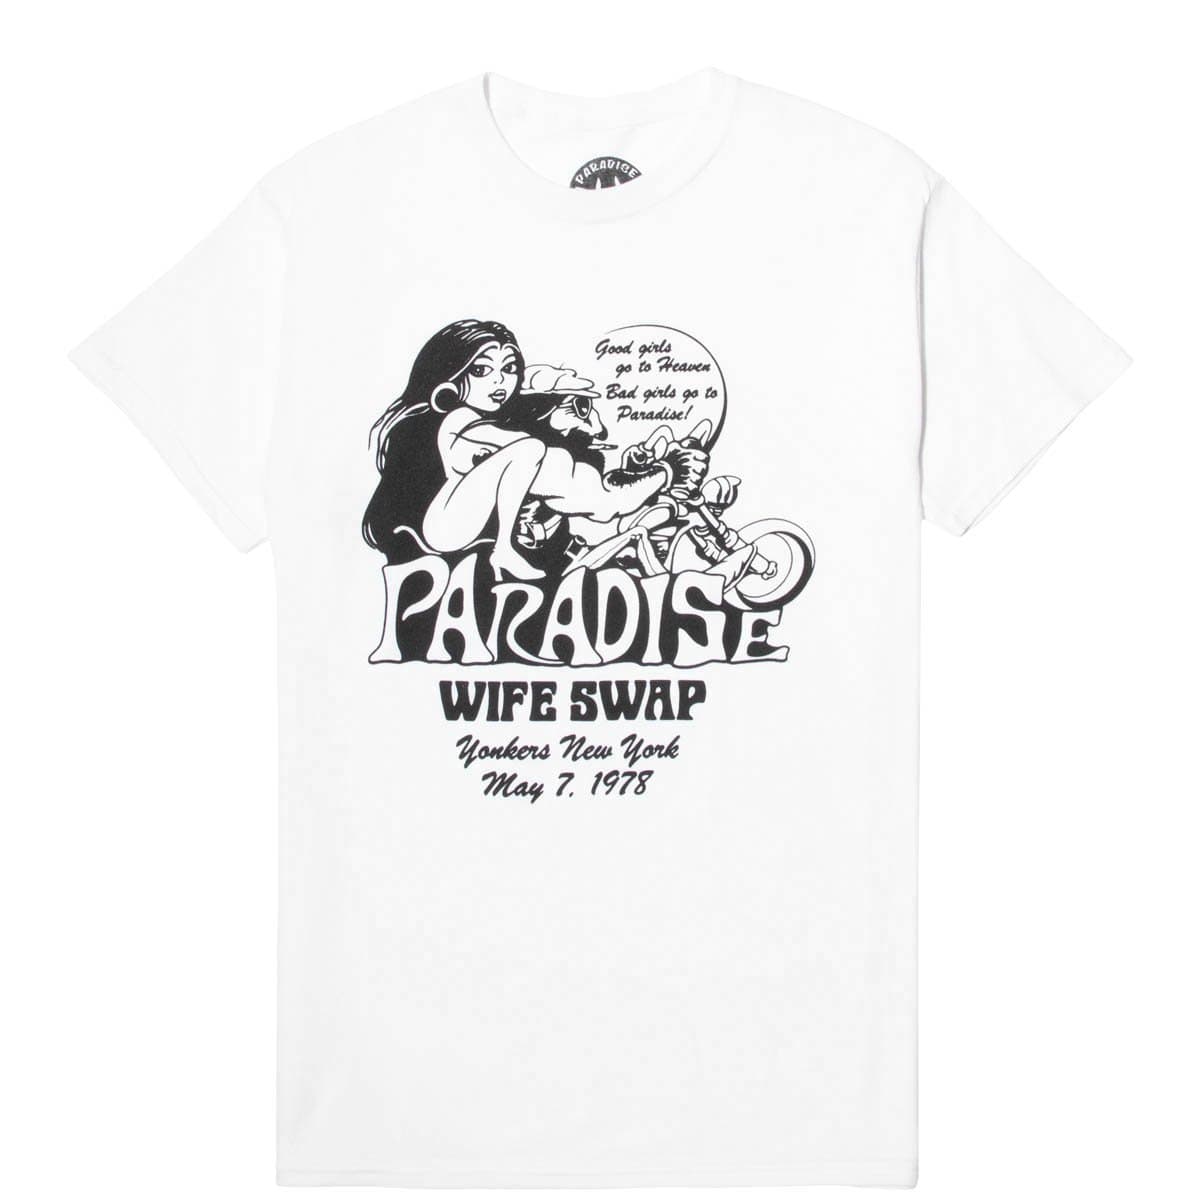 PARADIS3 T-Shirts WIFE SWAP YONKERS SS